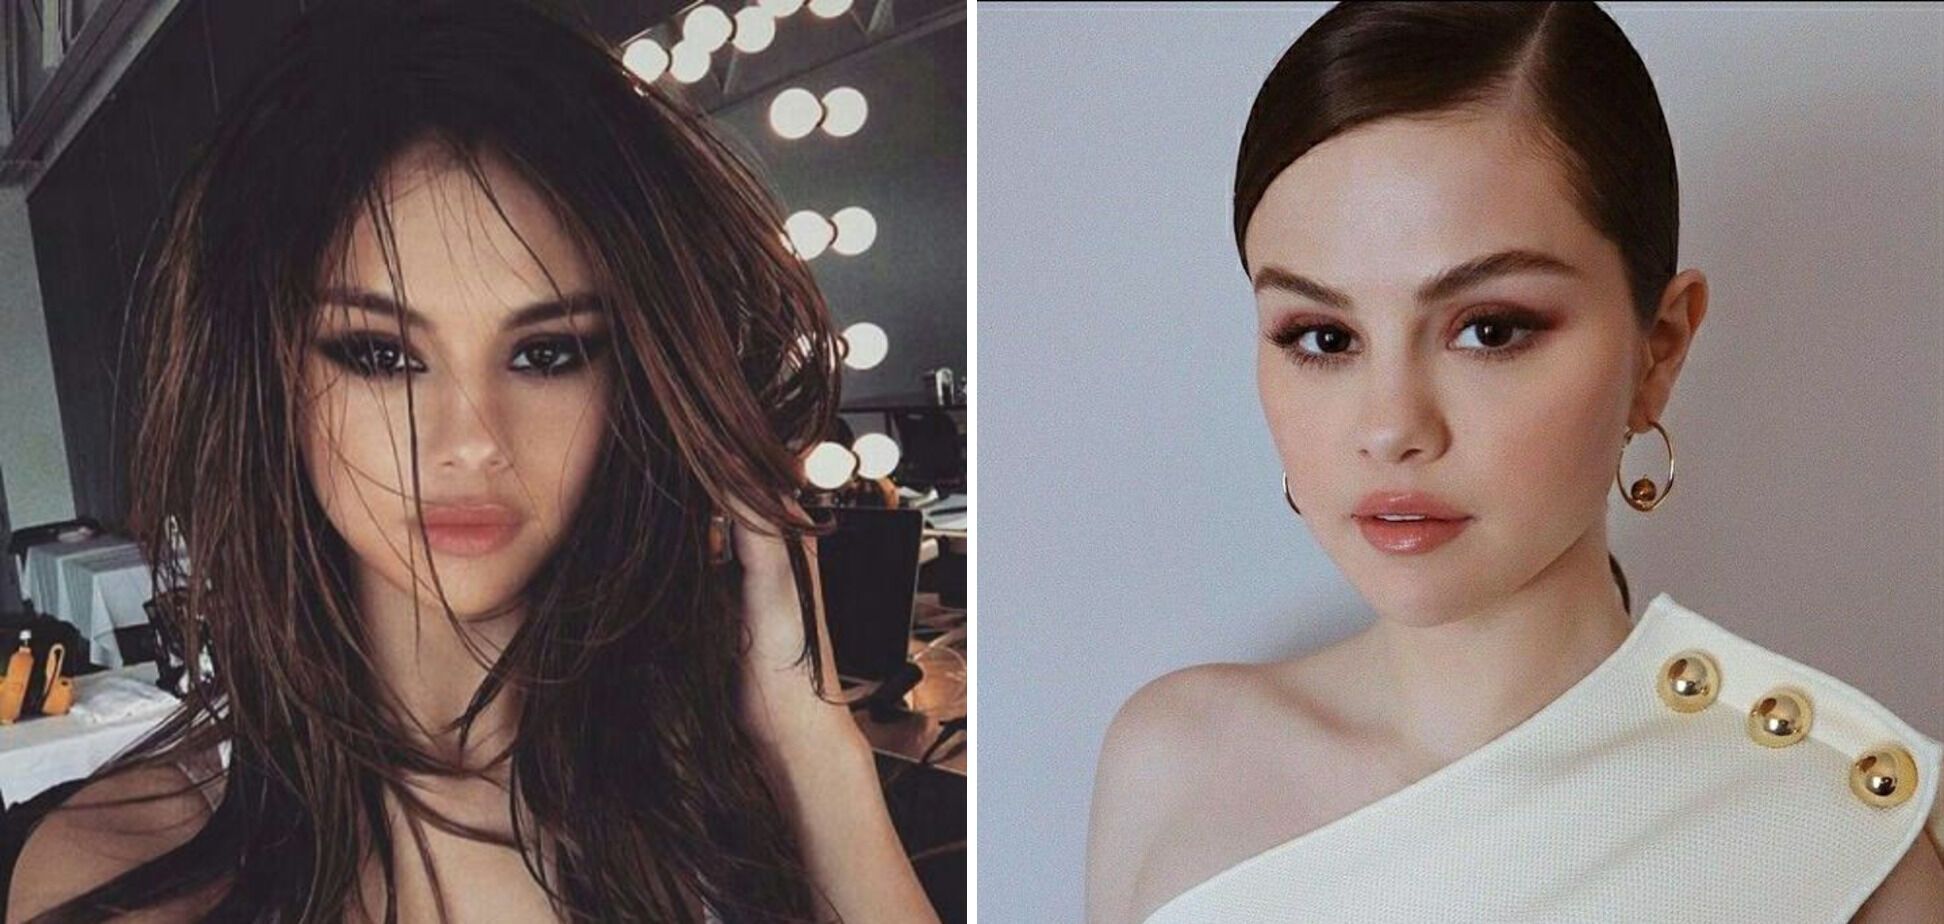 Selena Gomez with dark (left) and delicate light makeup (right)